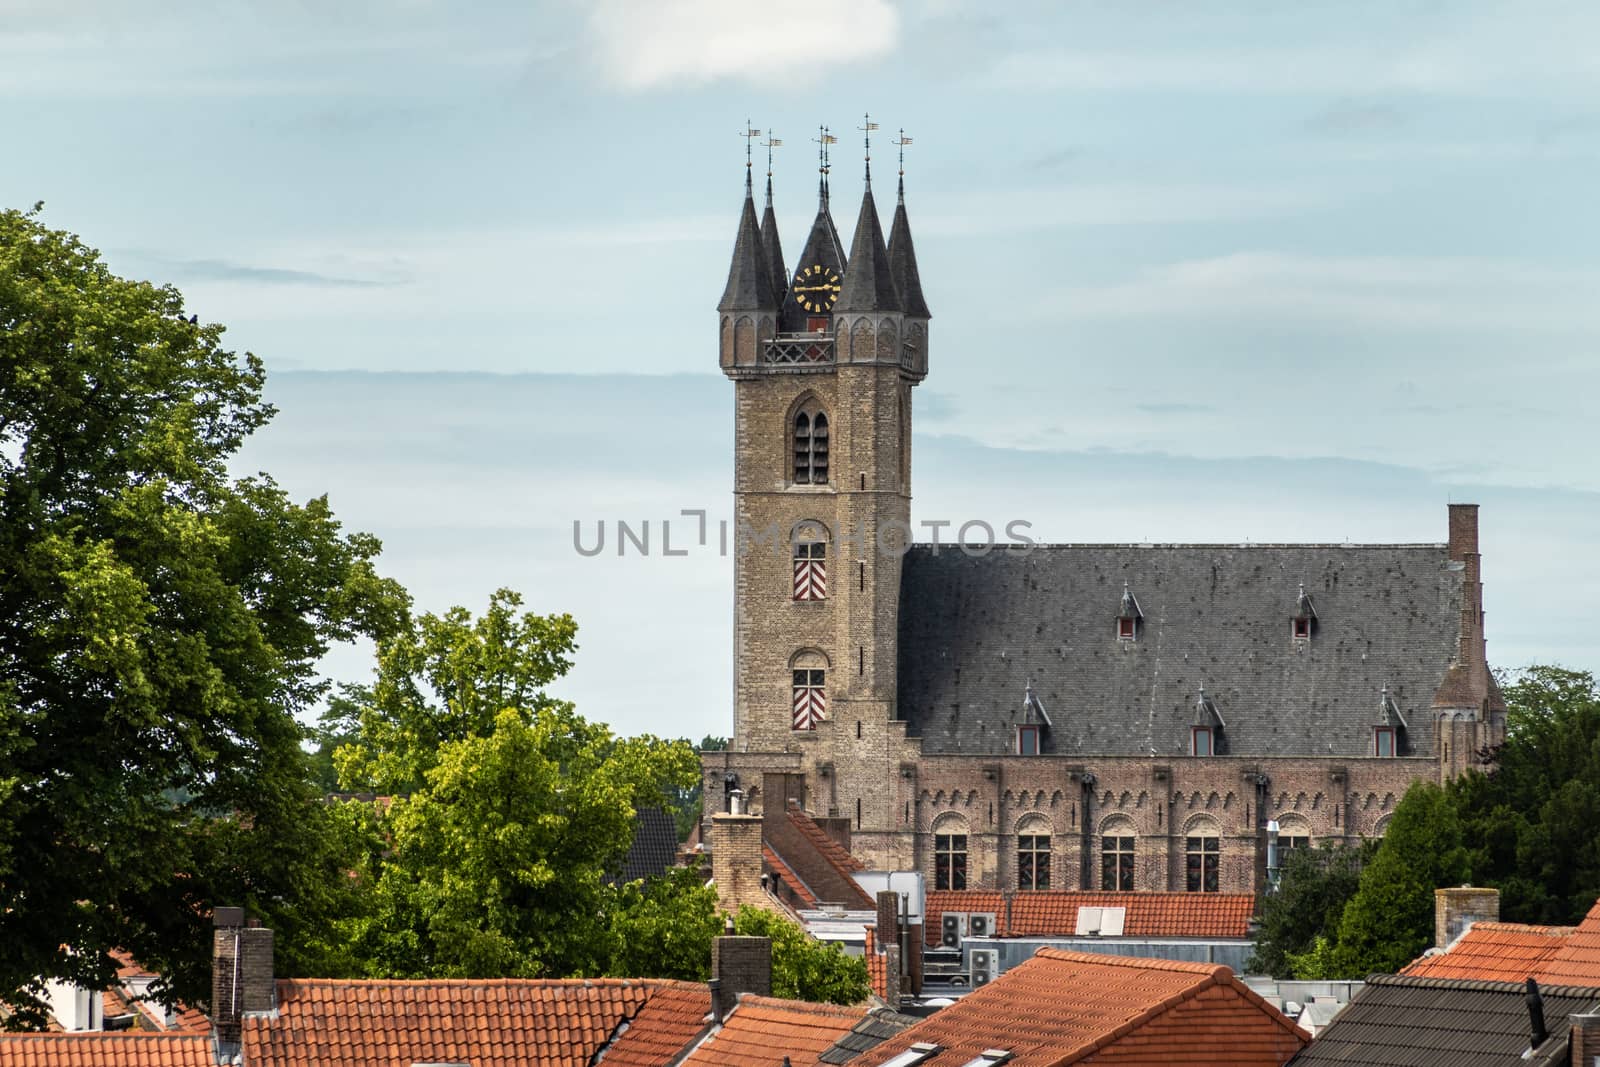 Sluis, the Netherlands -  June 16, 2019: View over red roofs at the brown brick Belfry with clock tower under light blue sky. Some Green foliage.